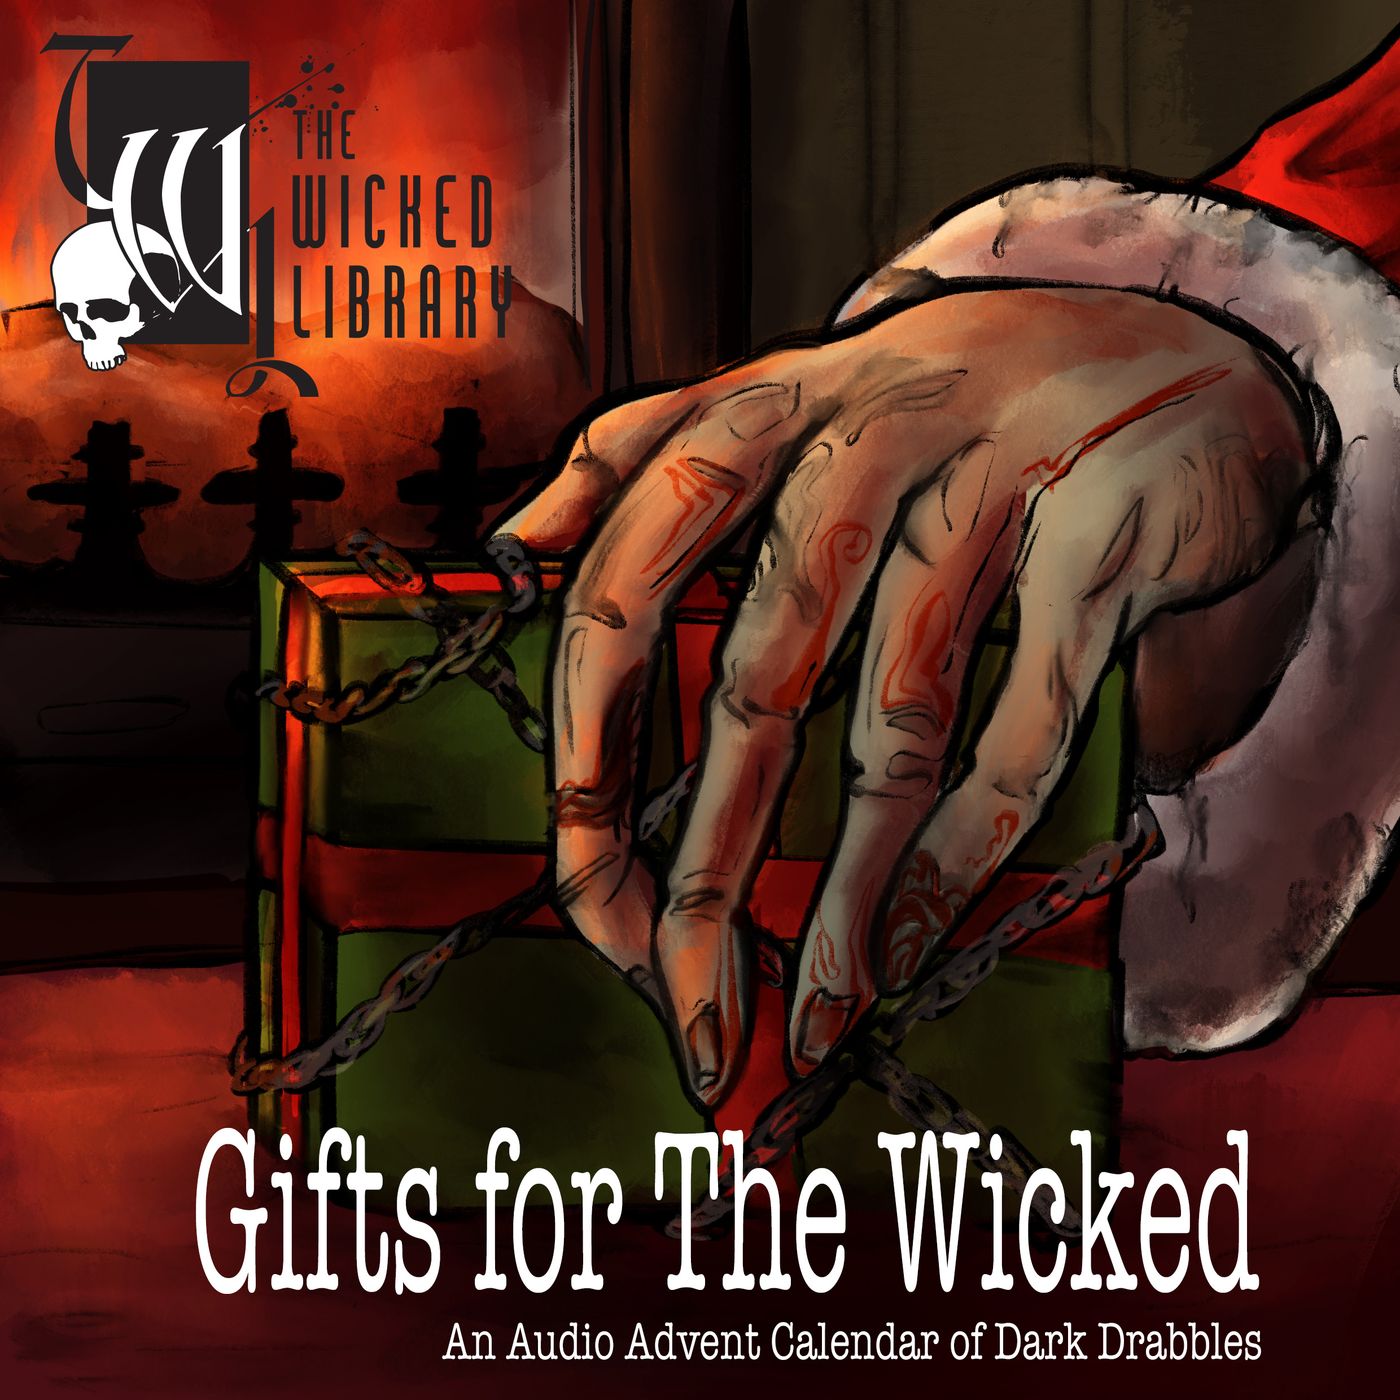 Gifts for The Wicked: “Who Wouldn't Go